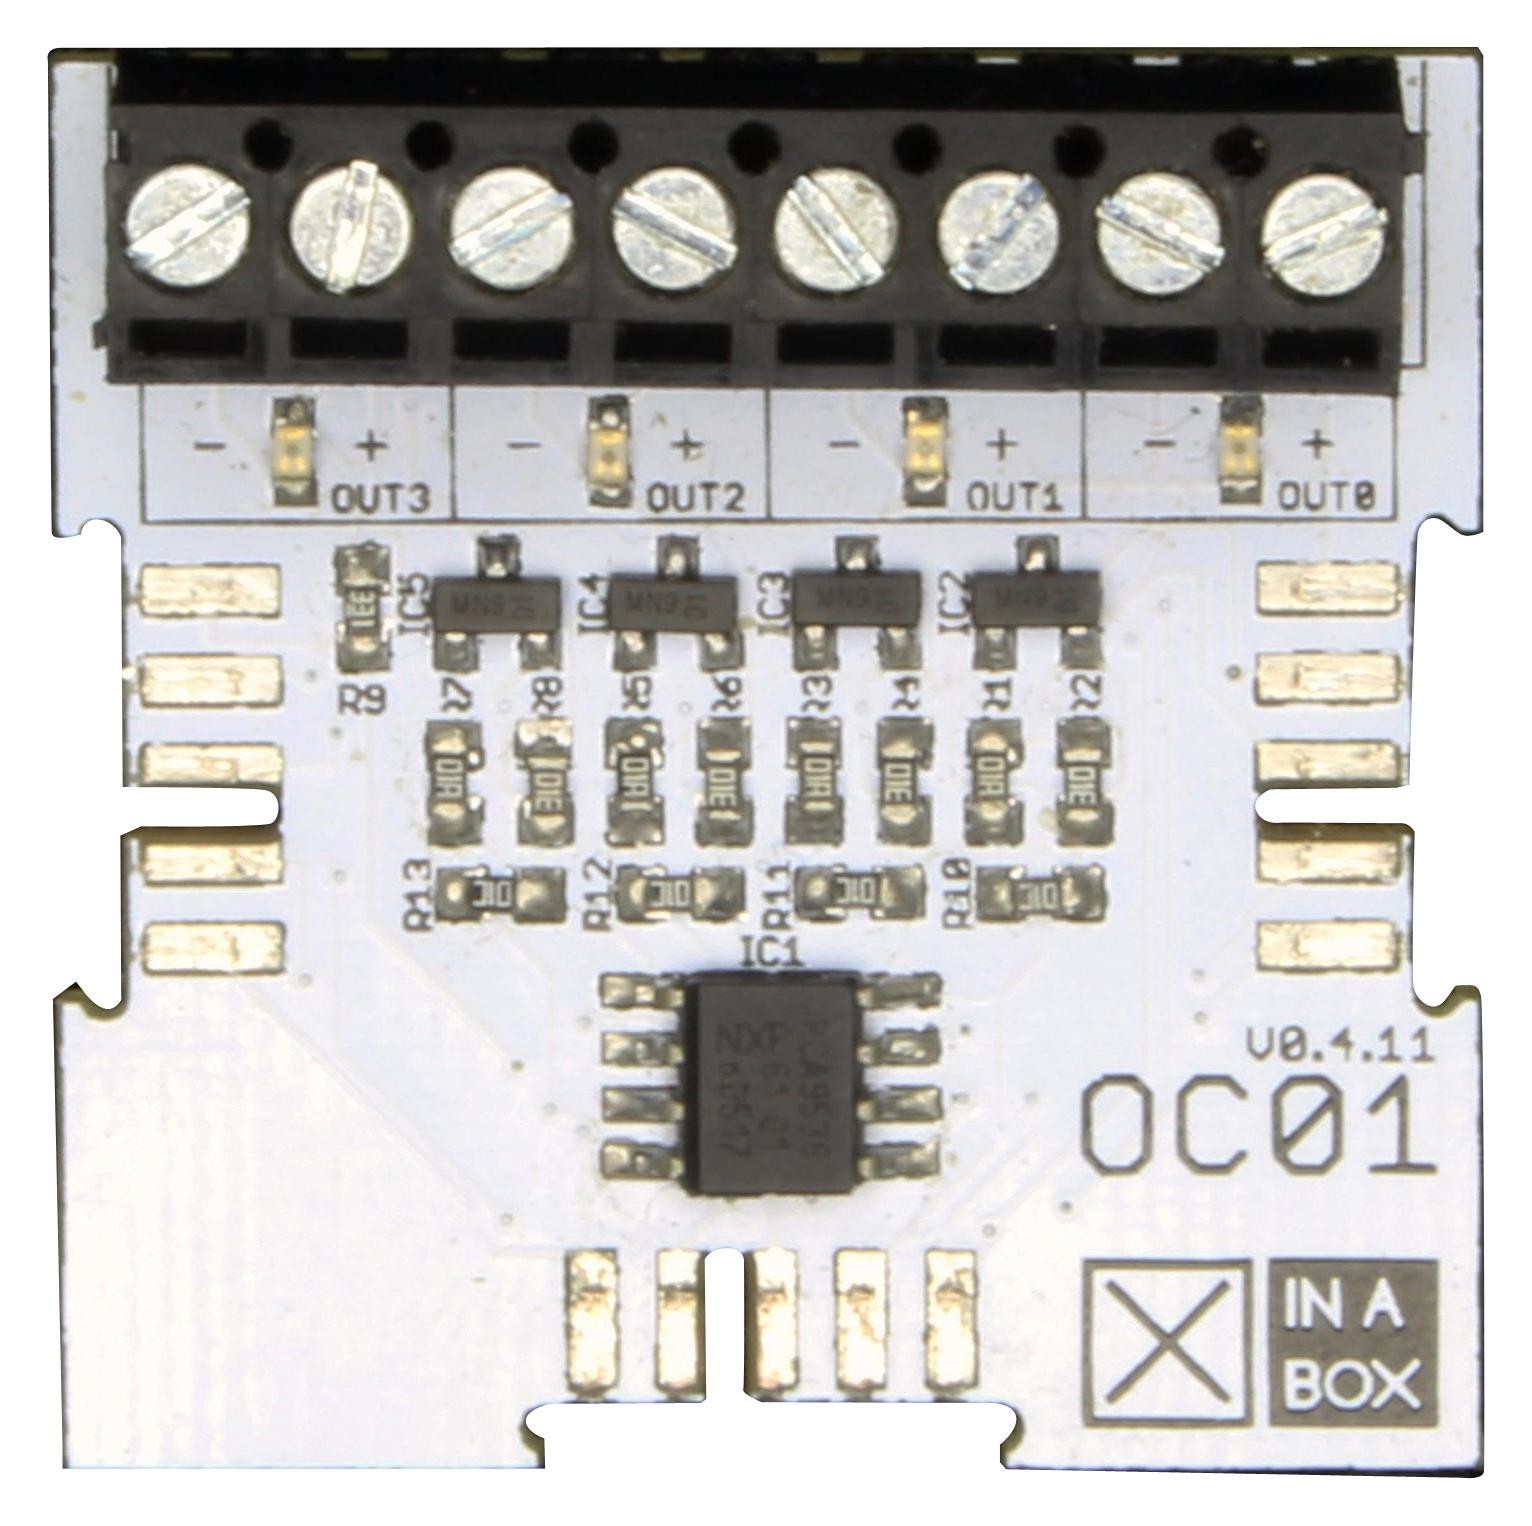 Xinabox Limited Oc01 High Current Dc Switch Module